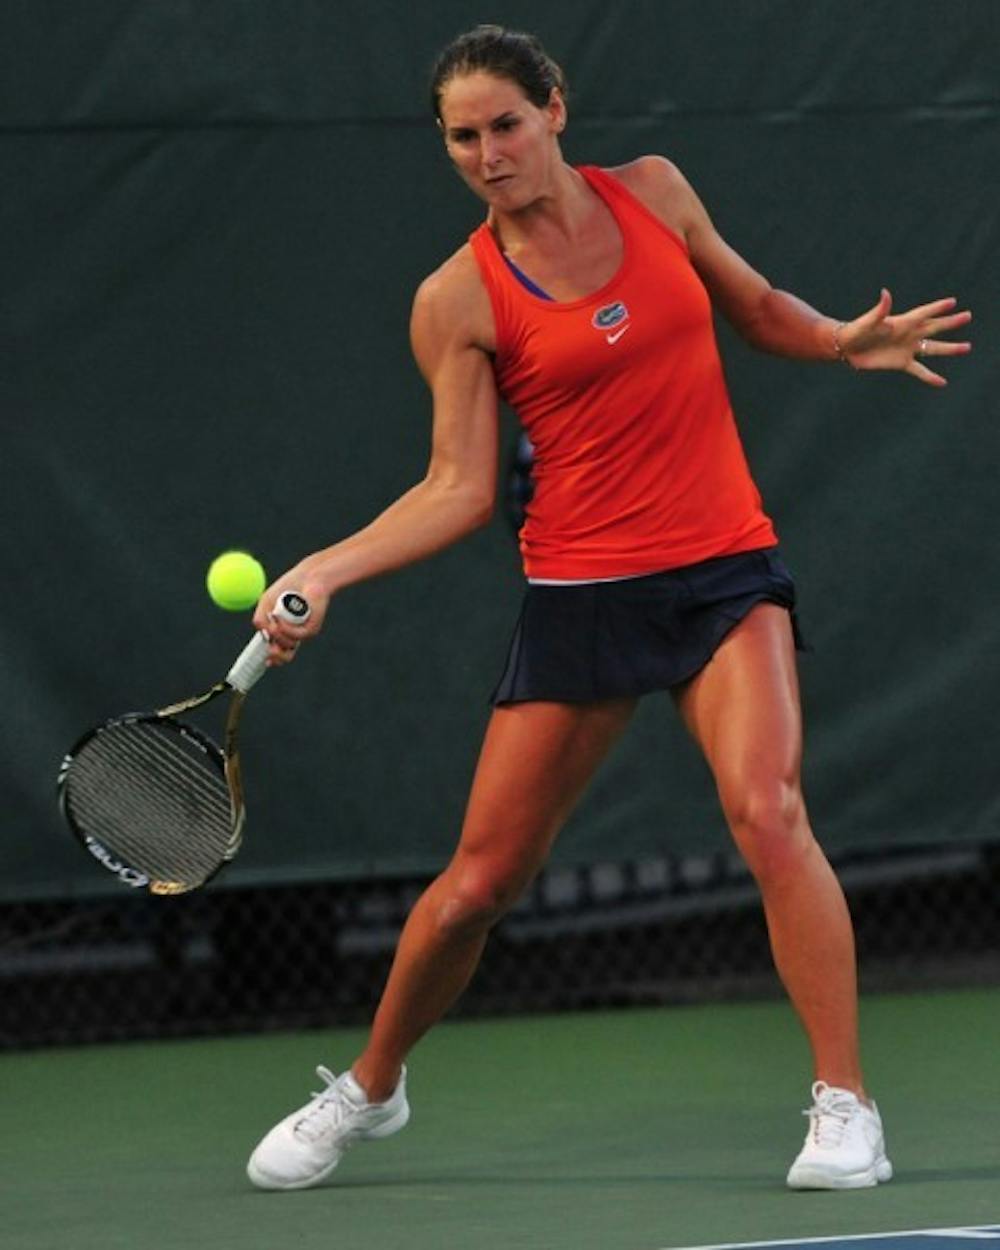 <p>Florida senior Joanna Mather, who has fallen from No. 4 to No. 18 in the individual rankings, beat FSU’s Mia Vriens in straight sets Wednesday.</p>